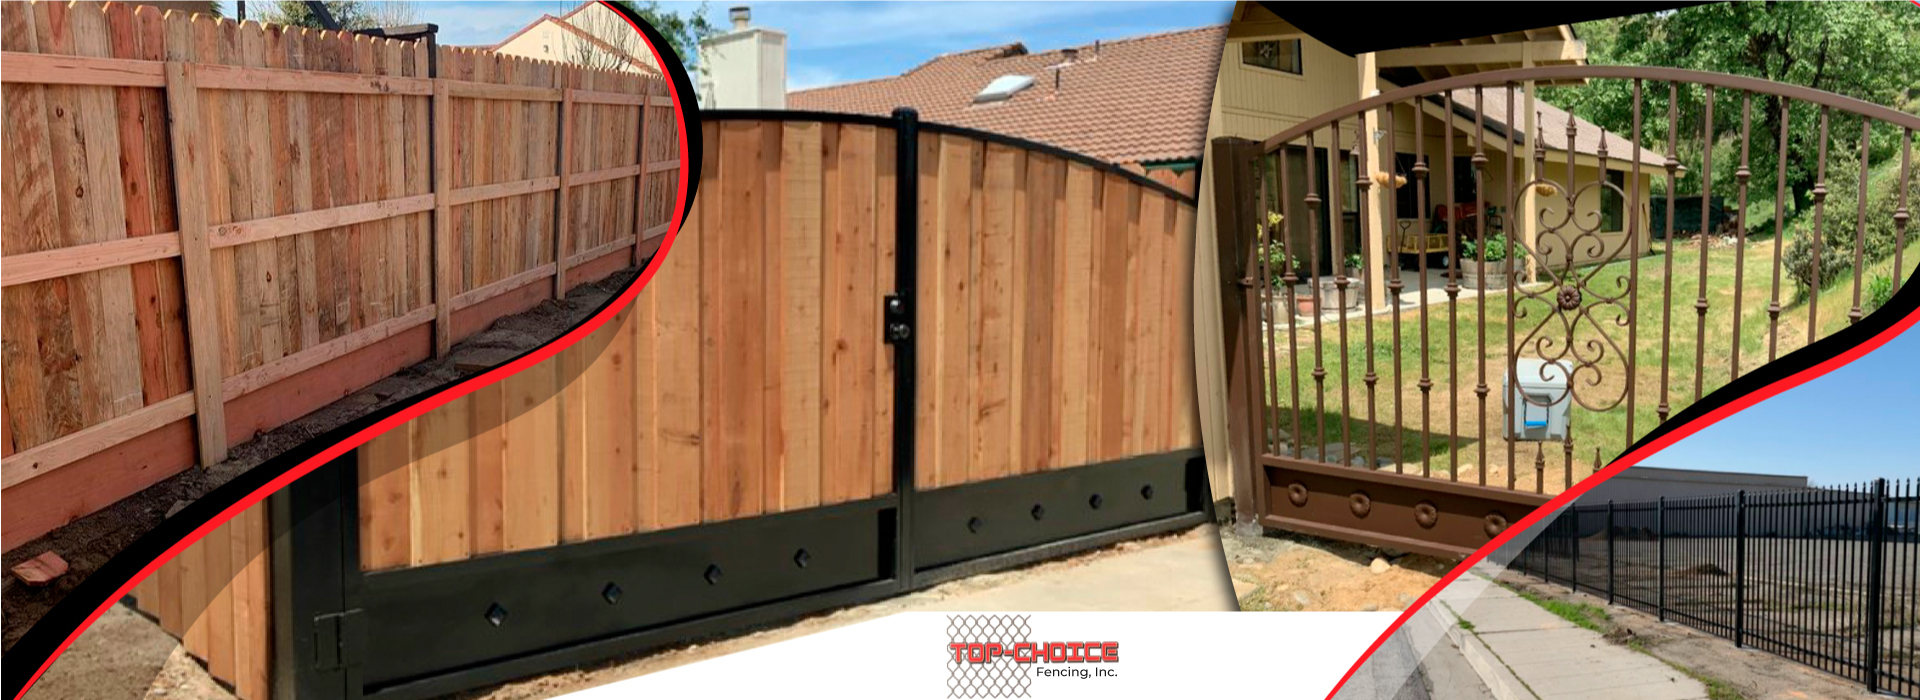 Top Choice Fencing, Inc - Slider